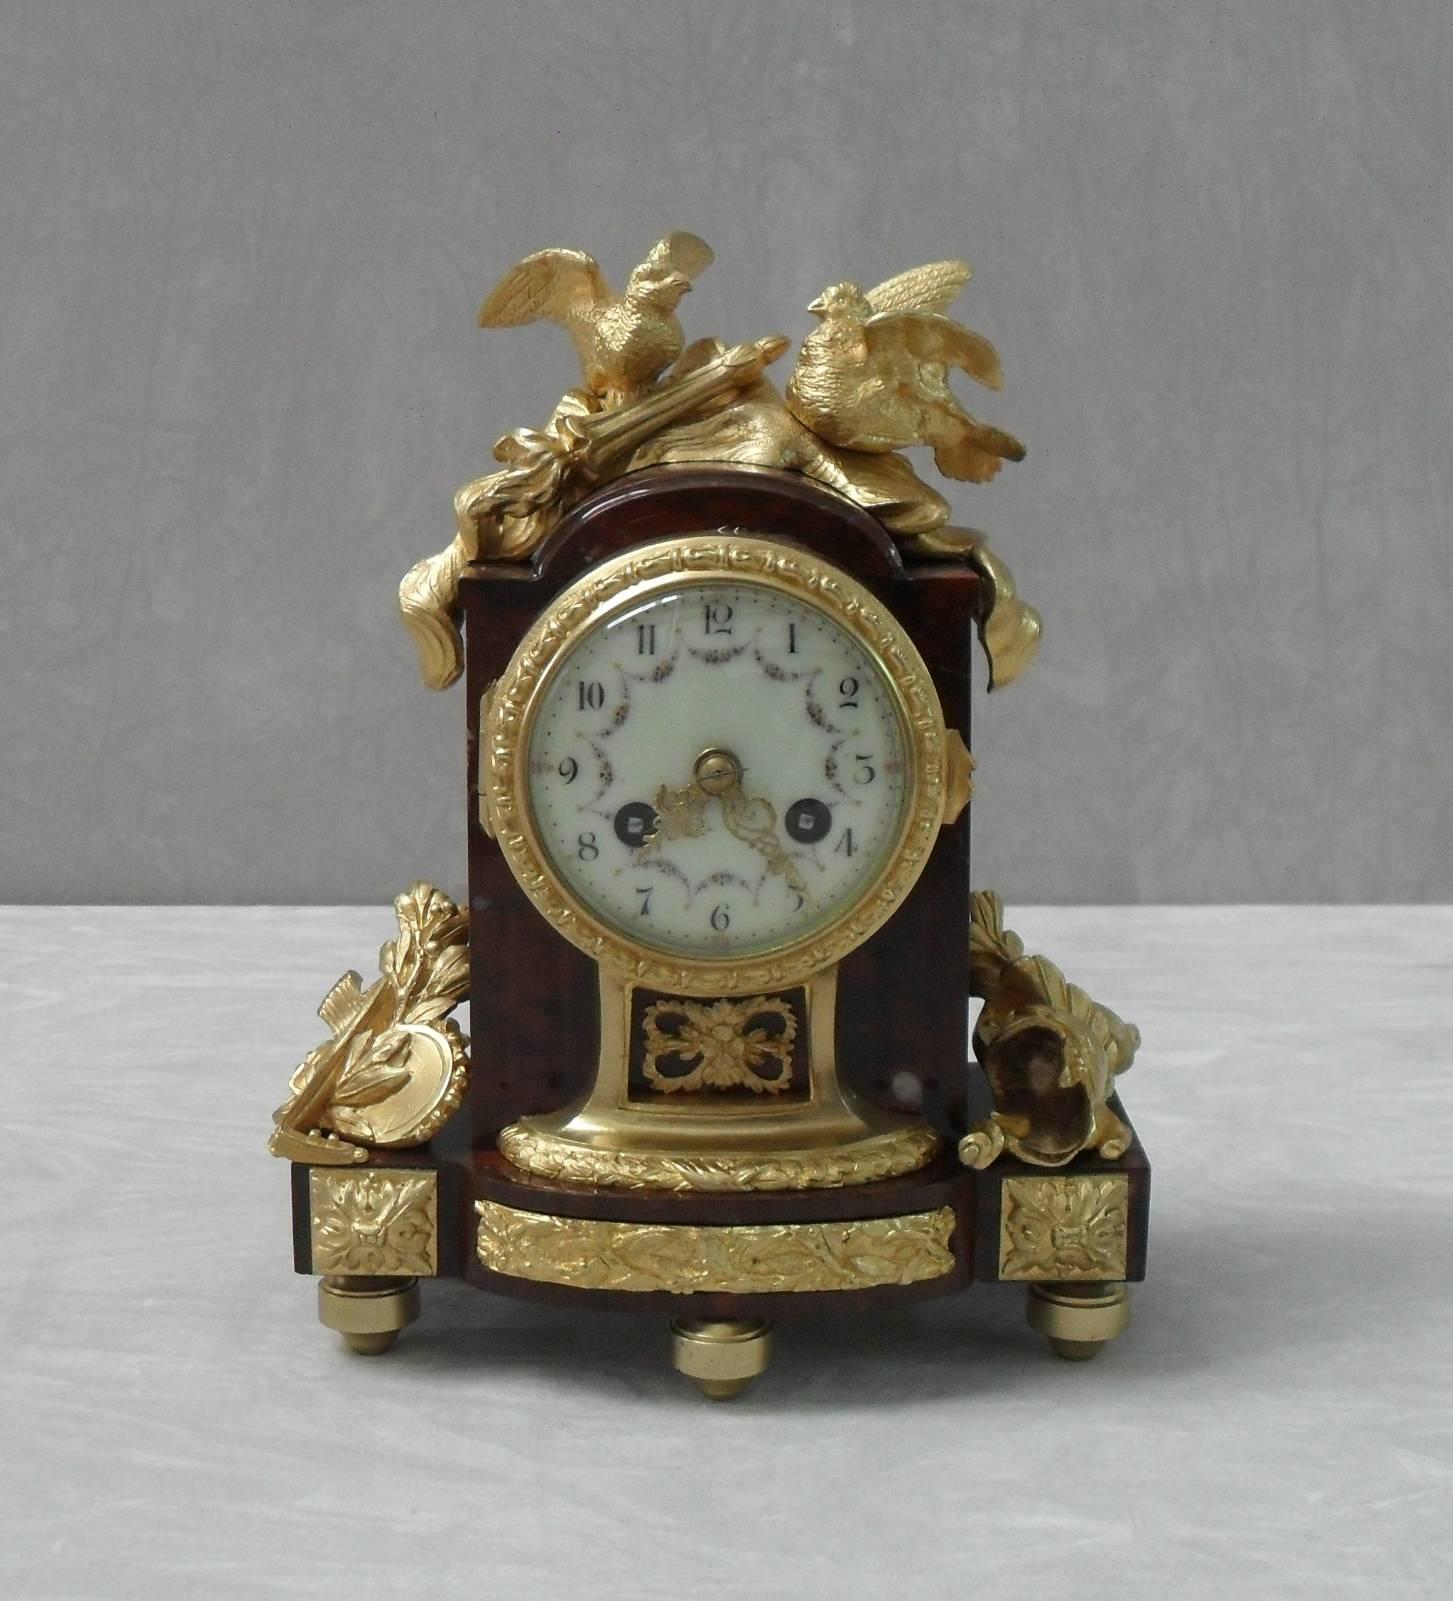 An extremely fine quality French Louis XIV style deep rouge marble and bronze gilt clock set comprising of a pair of two branch candelabra garnitures and a mantel clock. The clock is adorned with musical instruments, soldiers helmet, shield and is